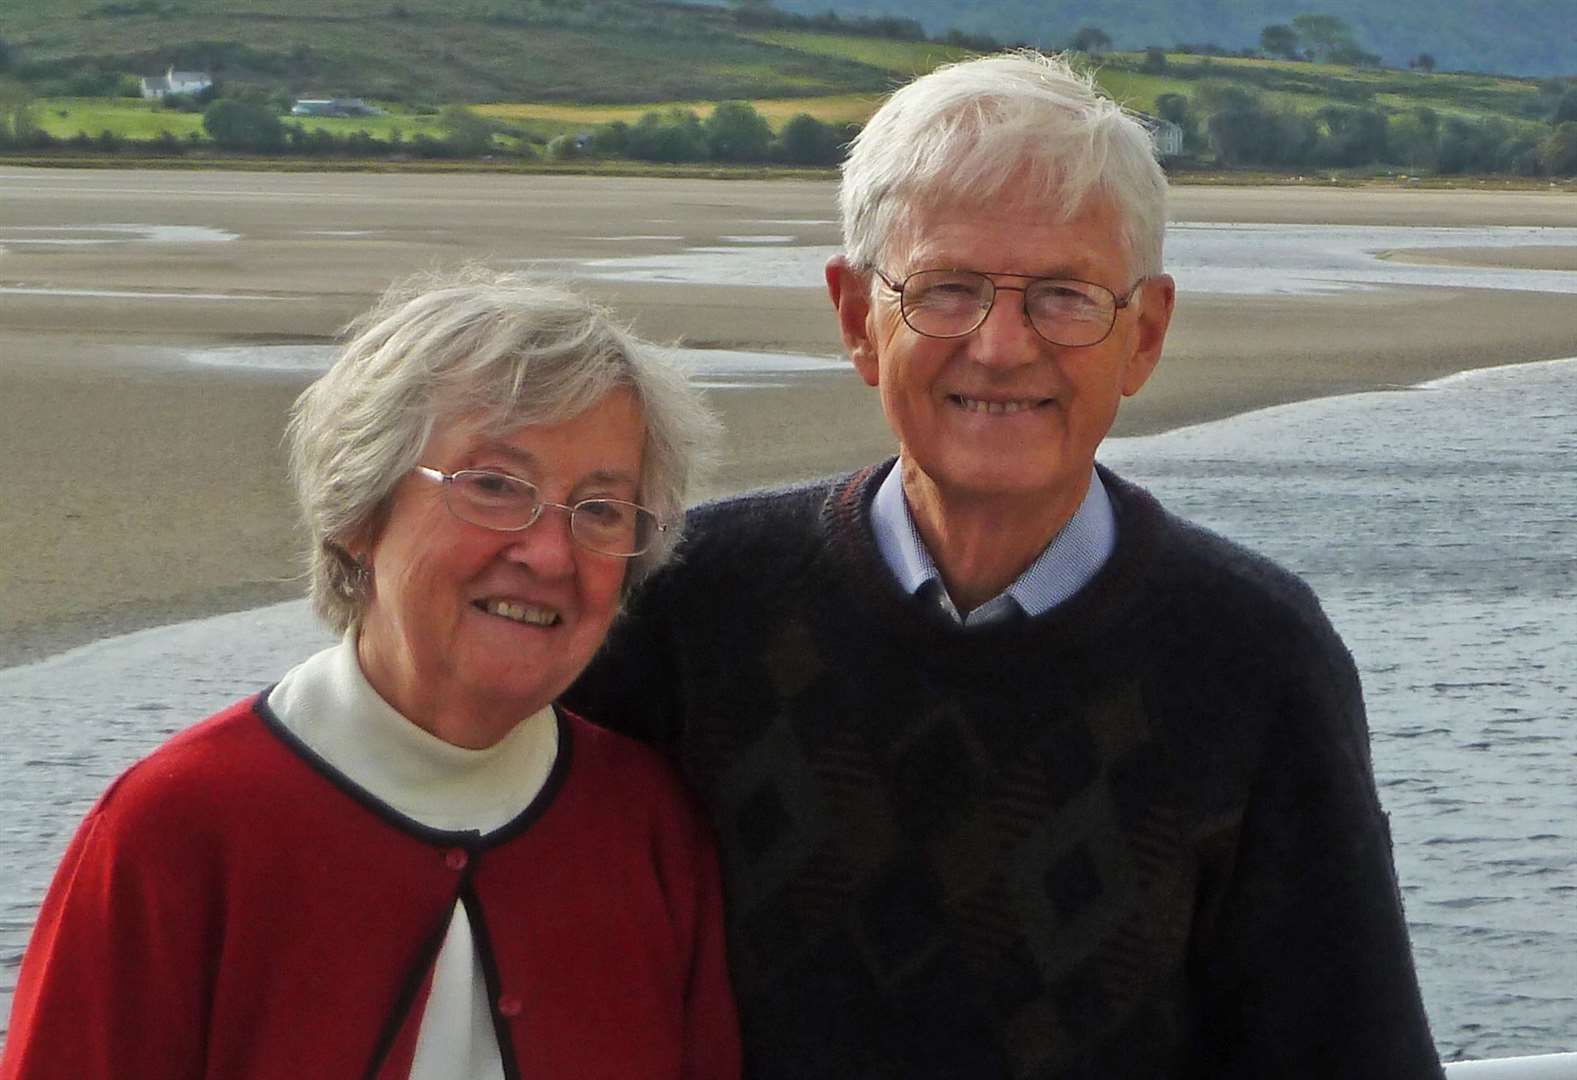 Bernard and Joyce were together for 60 years but she died in November